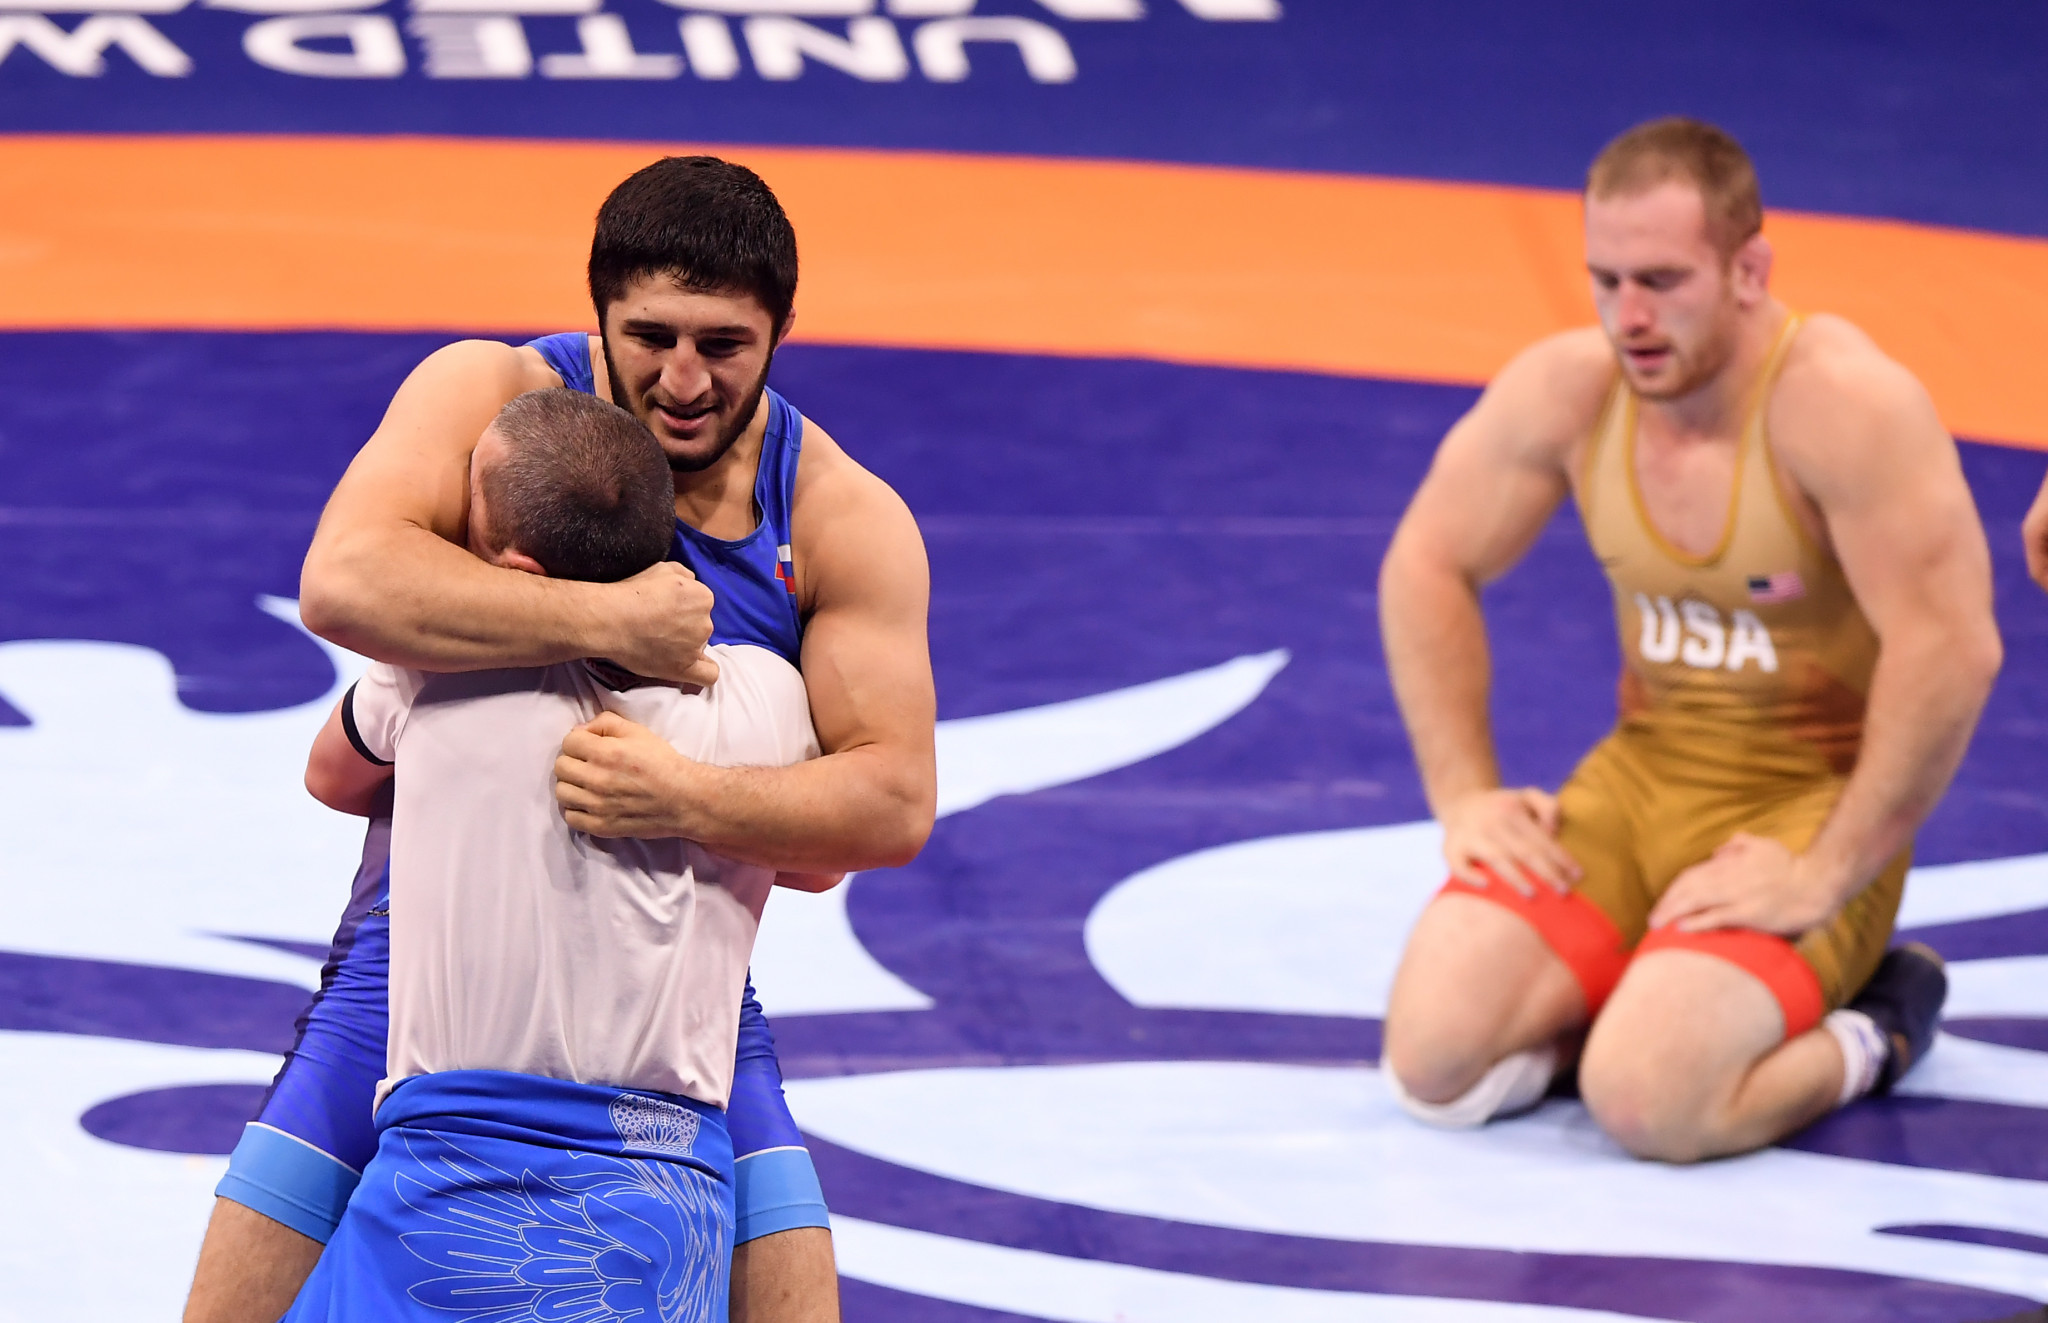 Seedings were introduced this year, which helped ensure the best wrestlers made the finals ©UWW